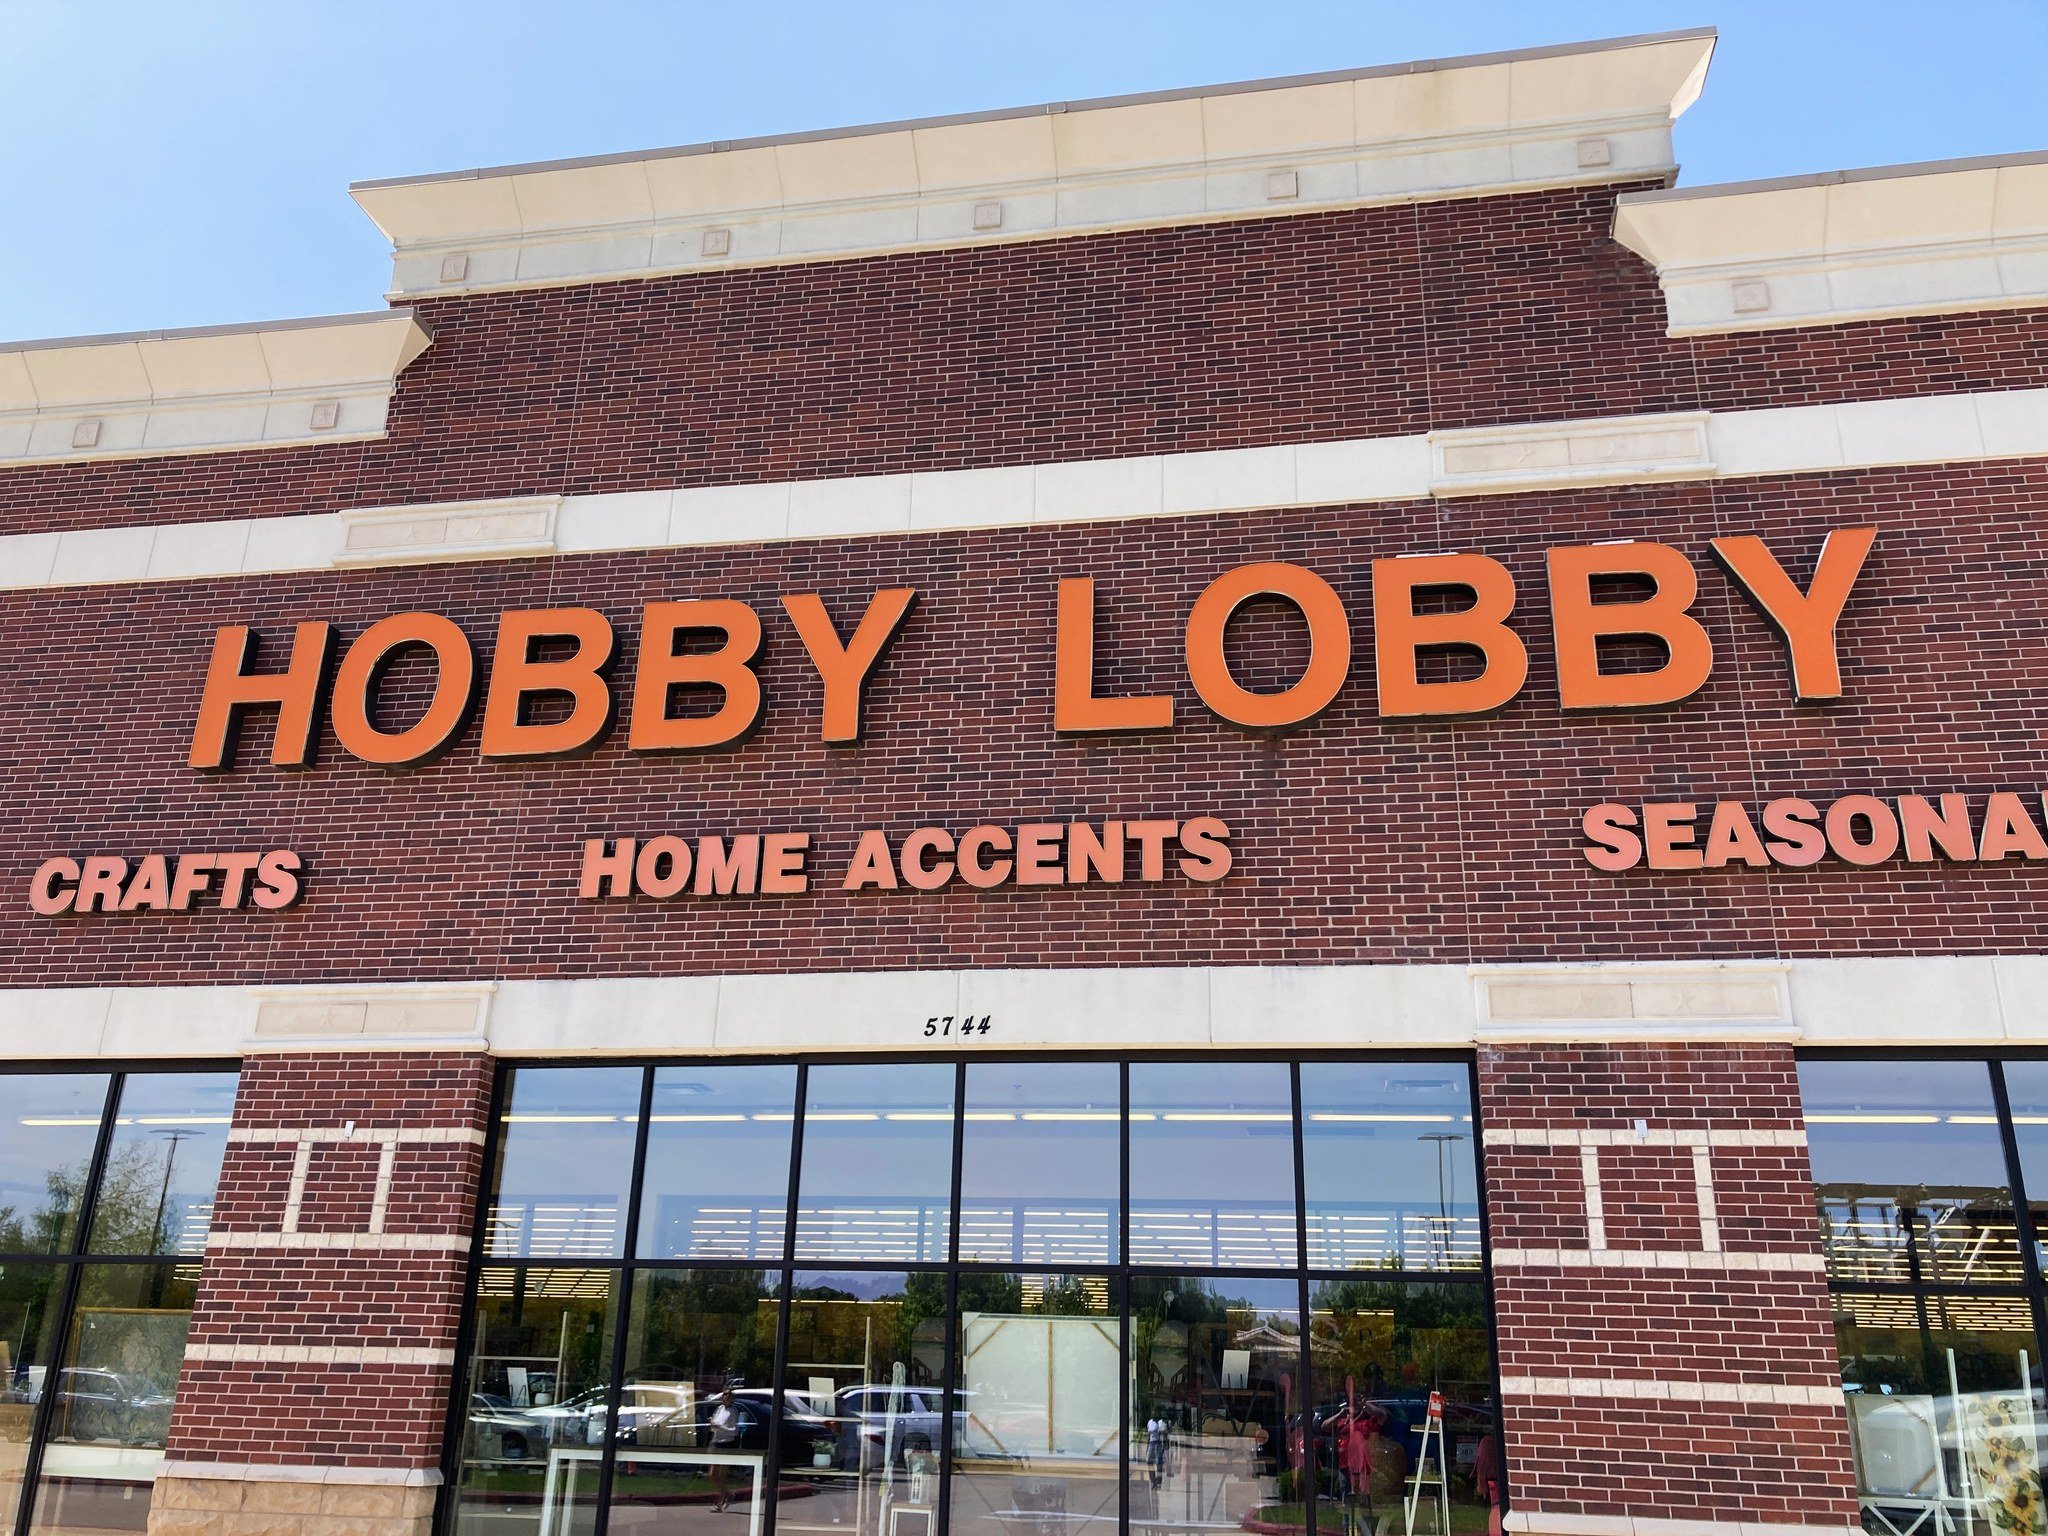 Let there be light! 💡 After a brief flicker, the 'Y' at Hobby Lobby is shining bright once again. We've got the power to illuminate even the quirkiest mishaps. Let's keep the creativity glowing! 🔦 
#bestintexas #bakerssigns #IlluminatedChannelLette